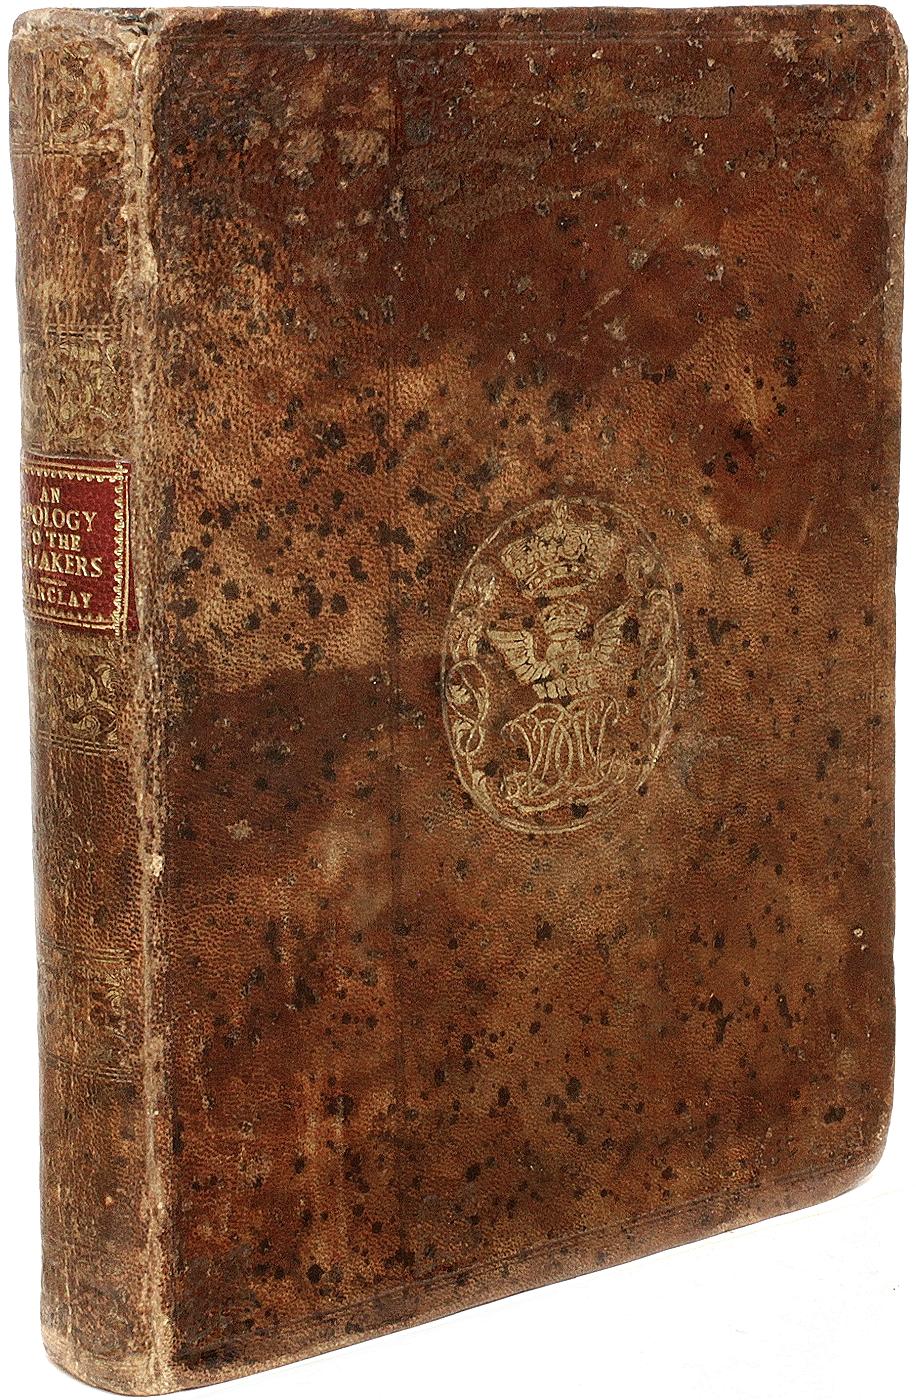 Late 17th Century BARCLAY. An Apology for the True Christian Divinity - 1678 - 1ST ED IN ENGLISH For Sale